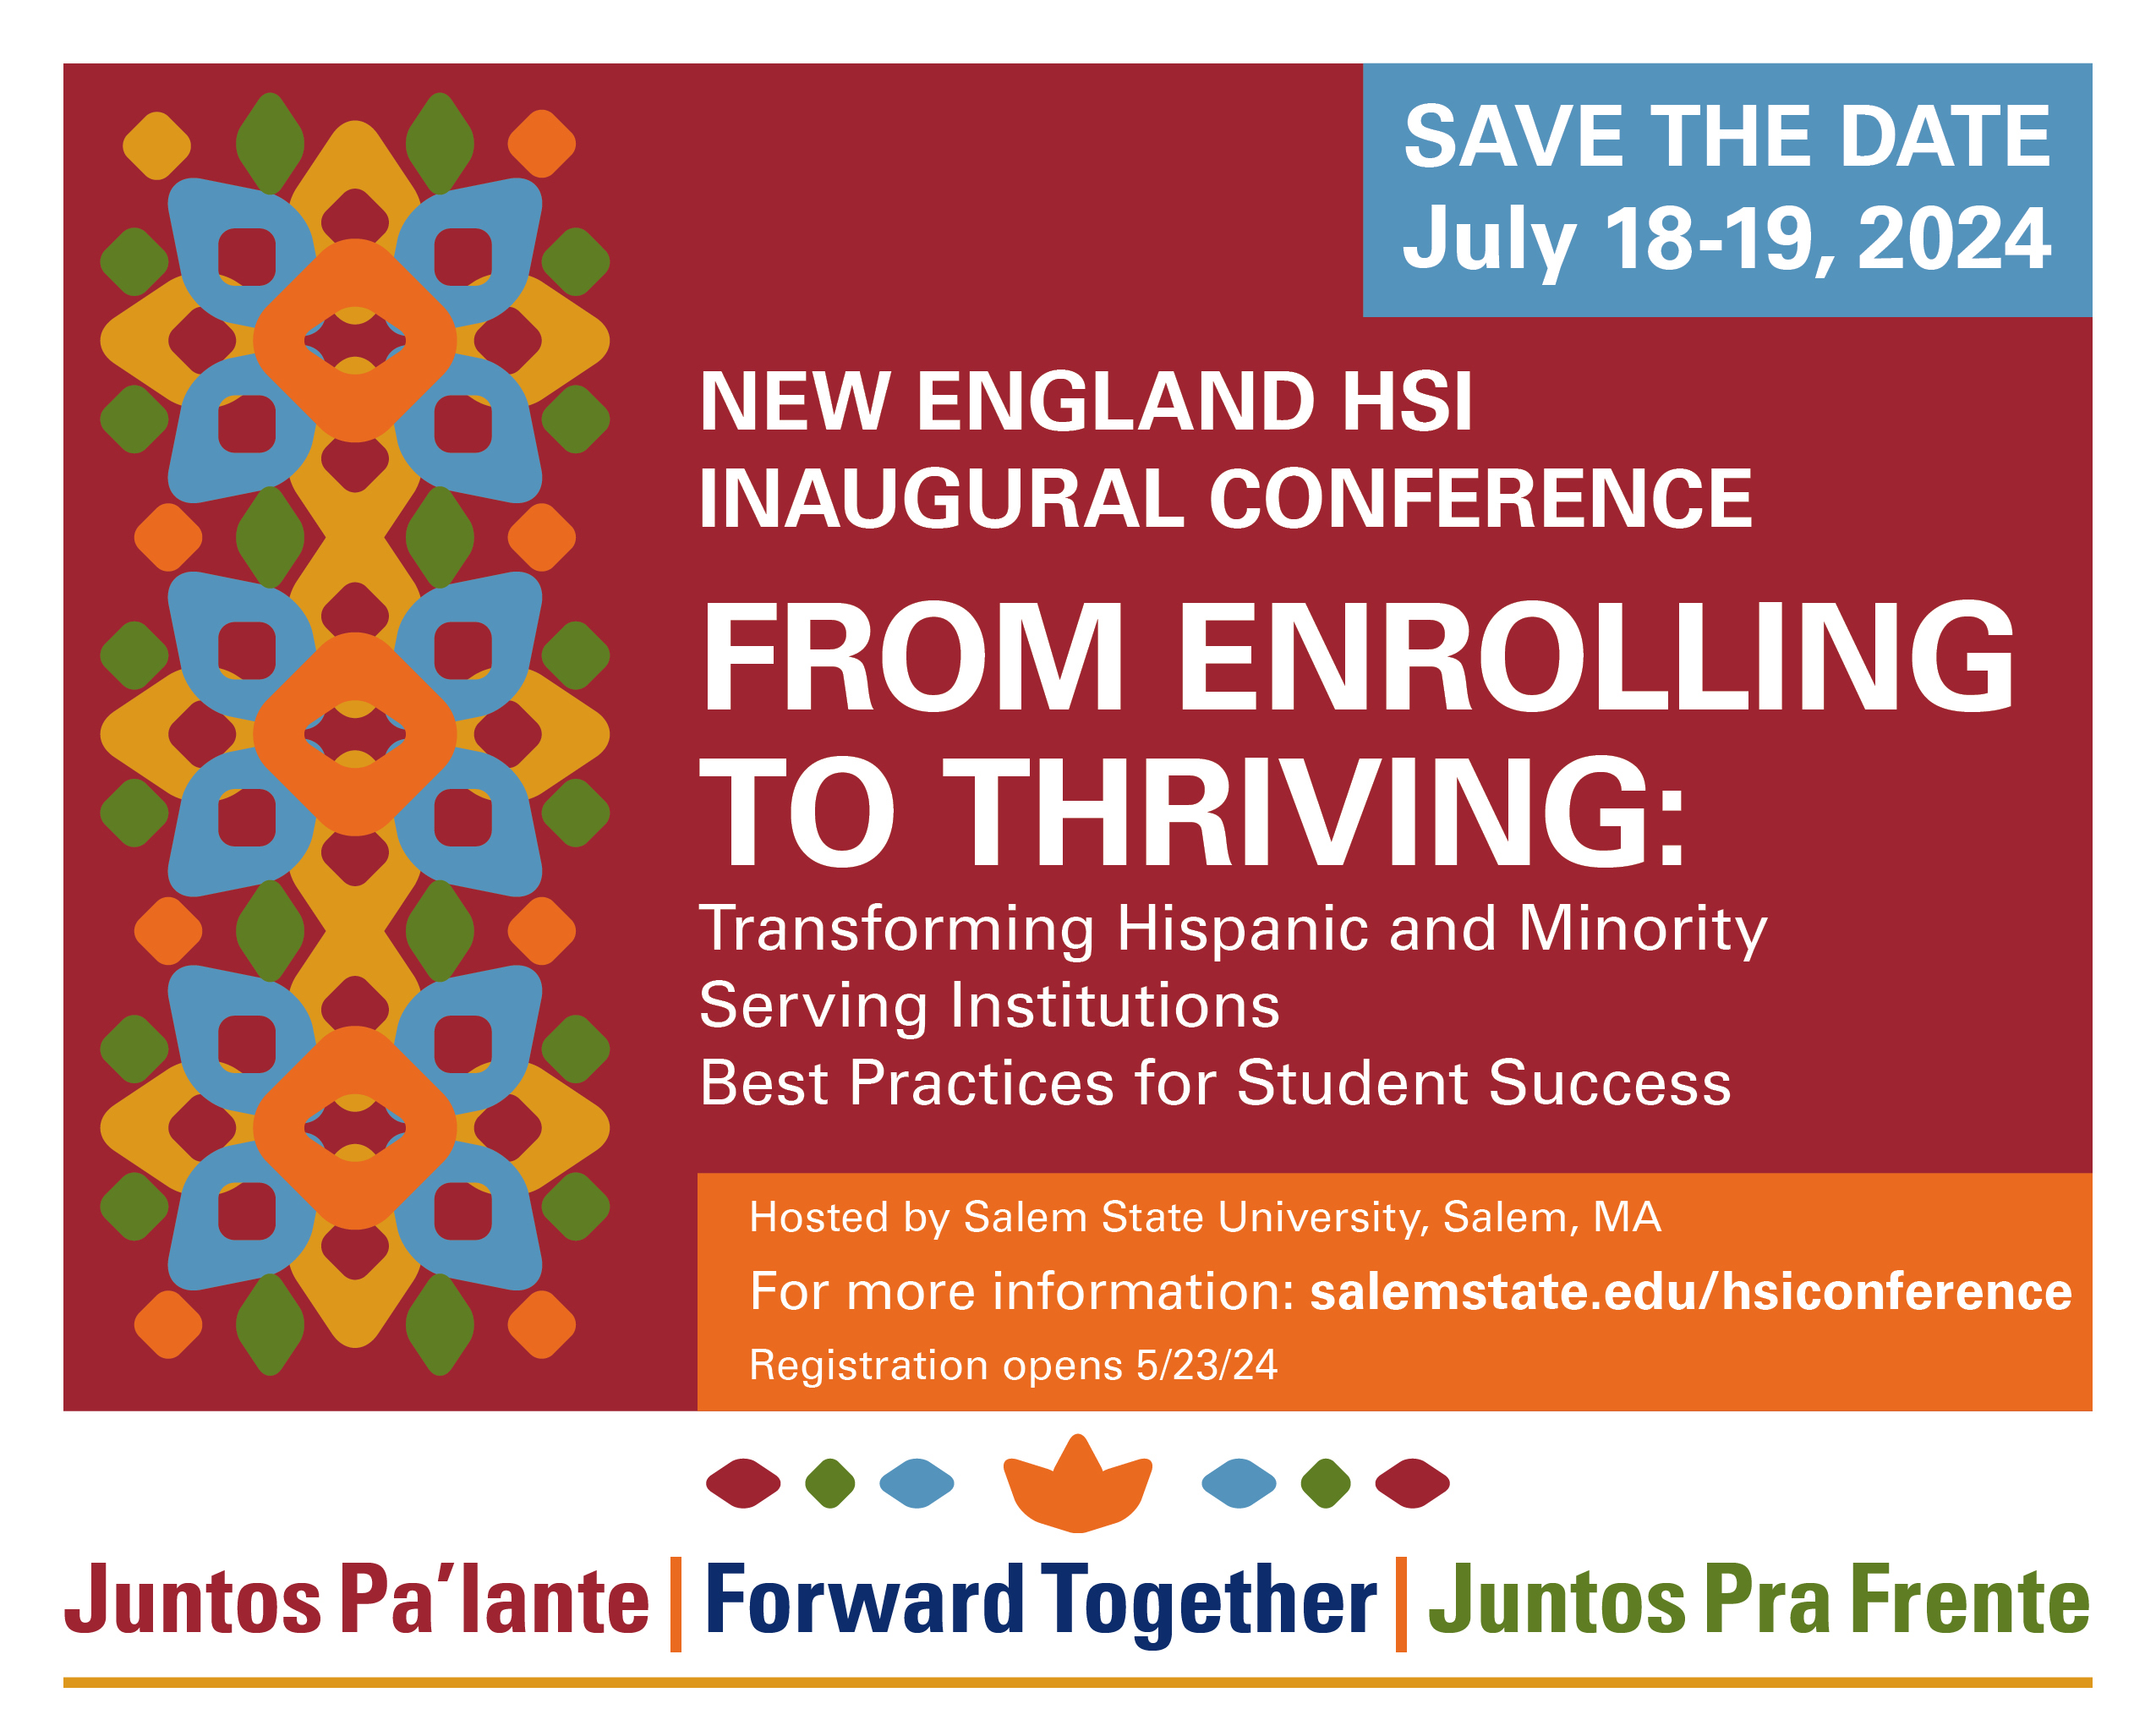 Conference banner: New England HSI Inaugural Conference. From Enrolling to Thriving: Transforming Hispanic and Minority Serving Institutions/Best Practices for Student Success